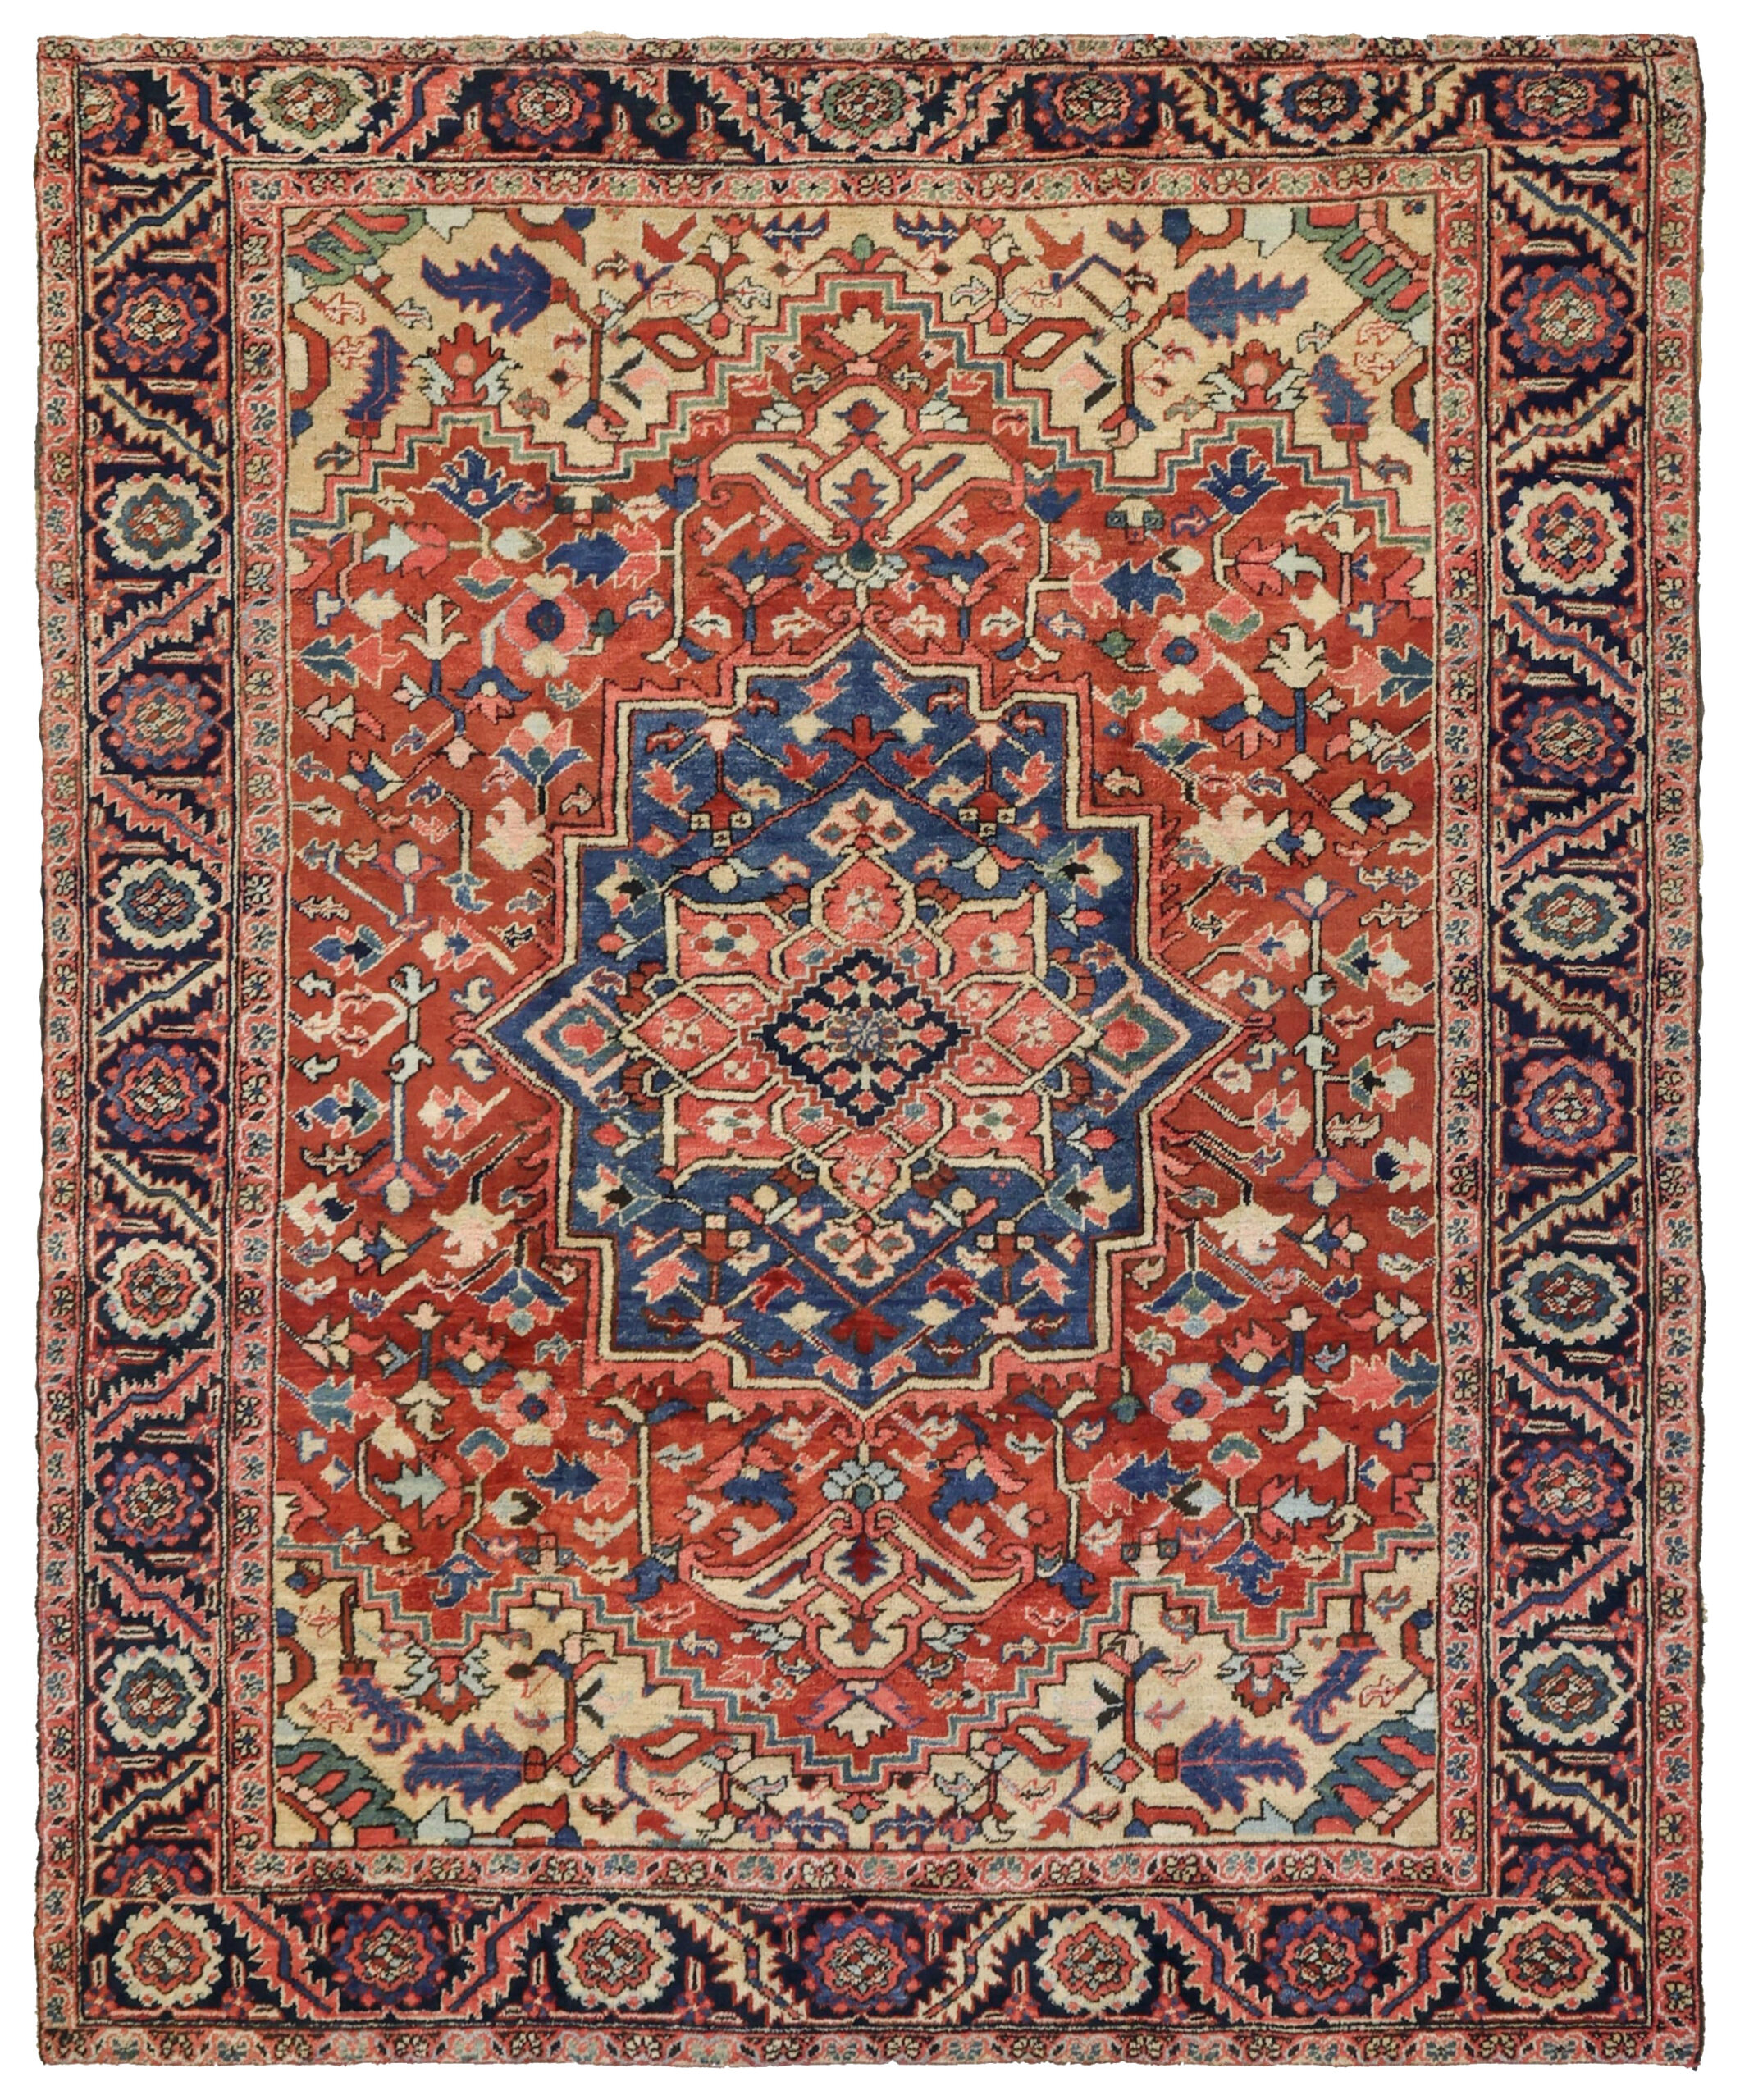 An antique Goravan carpet from the Heriz district in northwest Persia. The denim blue and coral medallion decorates the terra cotta color field which is framed by camel color corner spandrels and a navy blue border. Douglas Stock Gallery, antique Oriental rugs Boston, Brookline, Concord, Weston, Wellesley, Dover, Sherborn, Needham, Natick,MA area